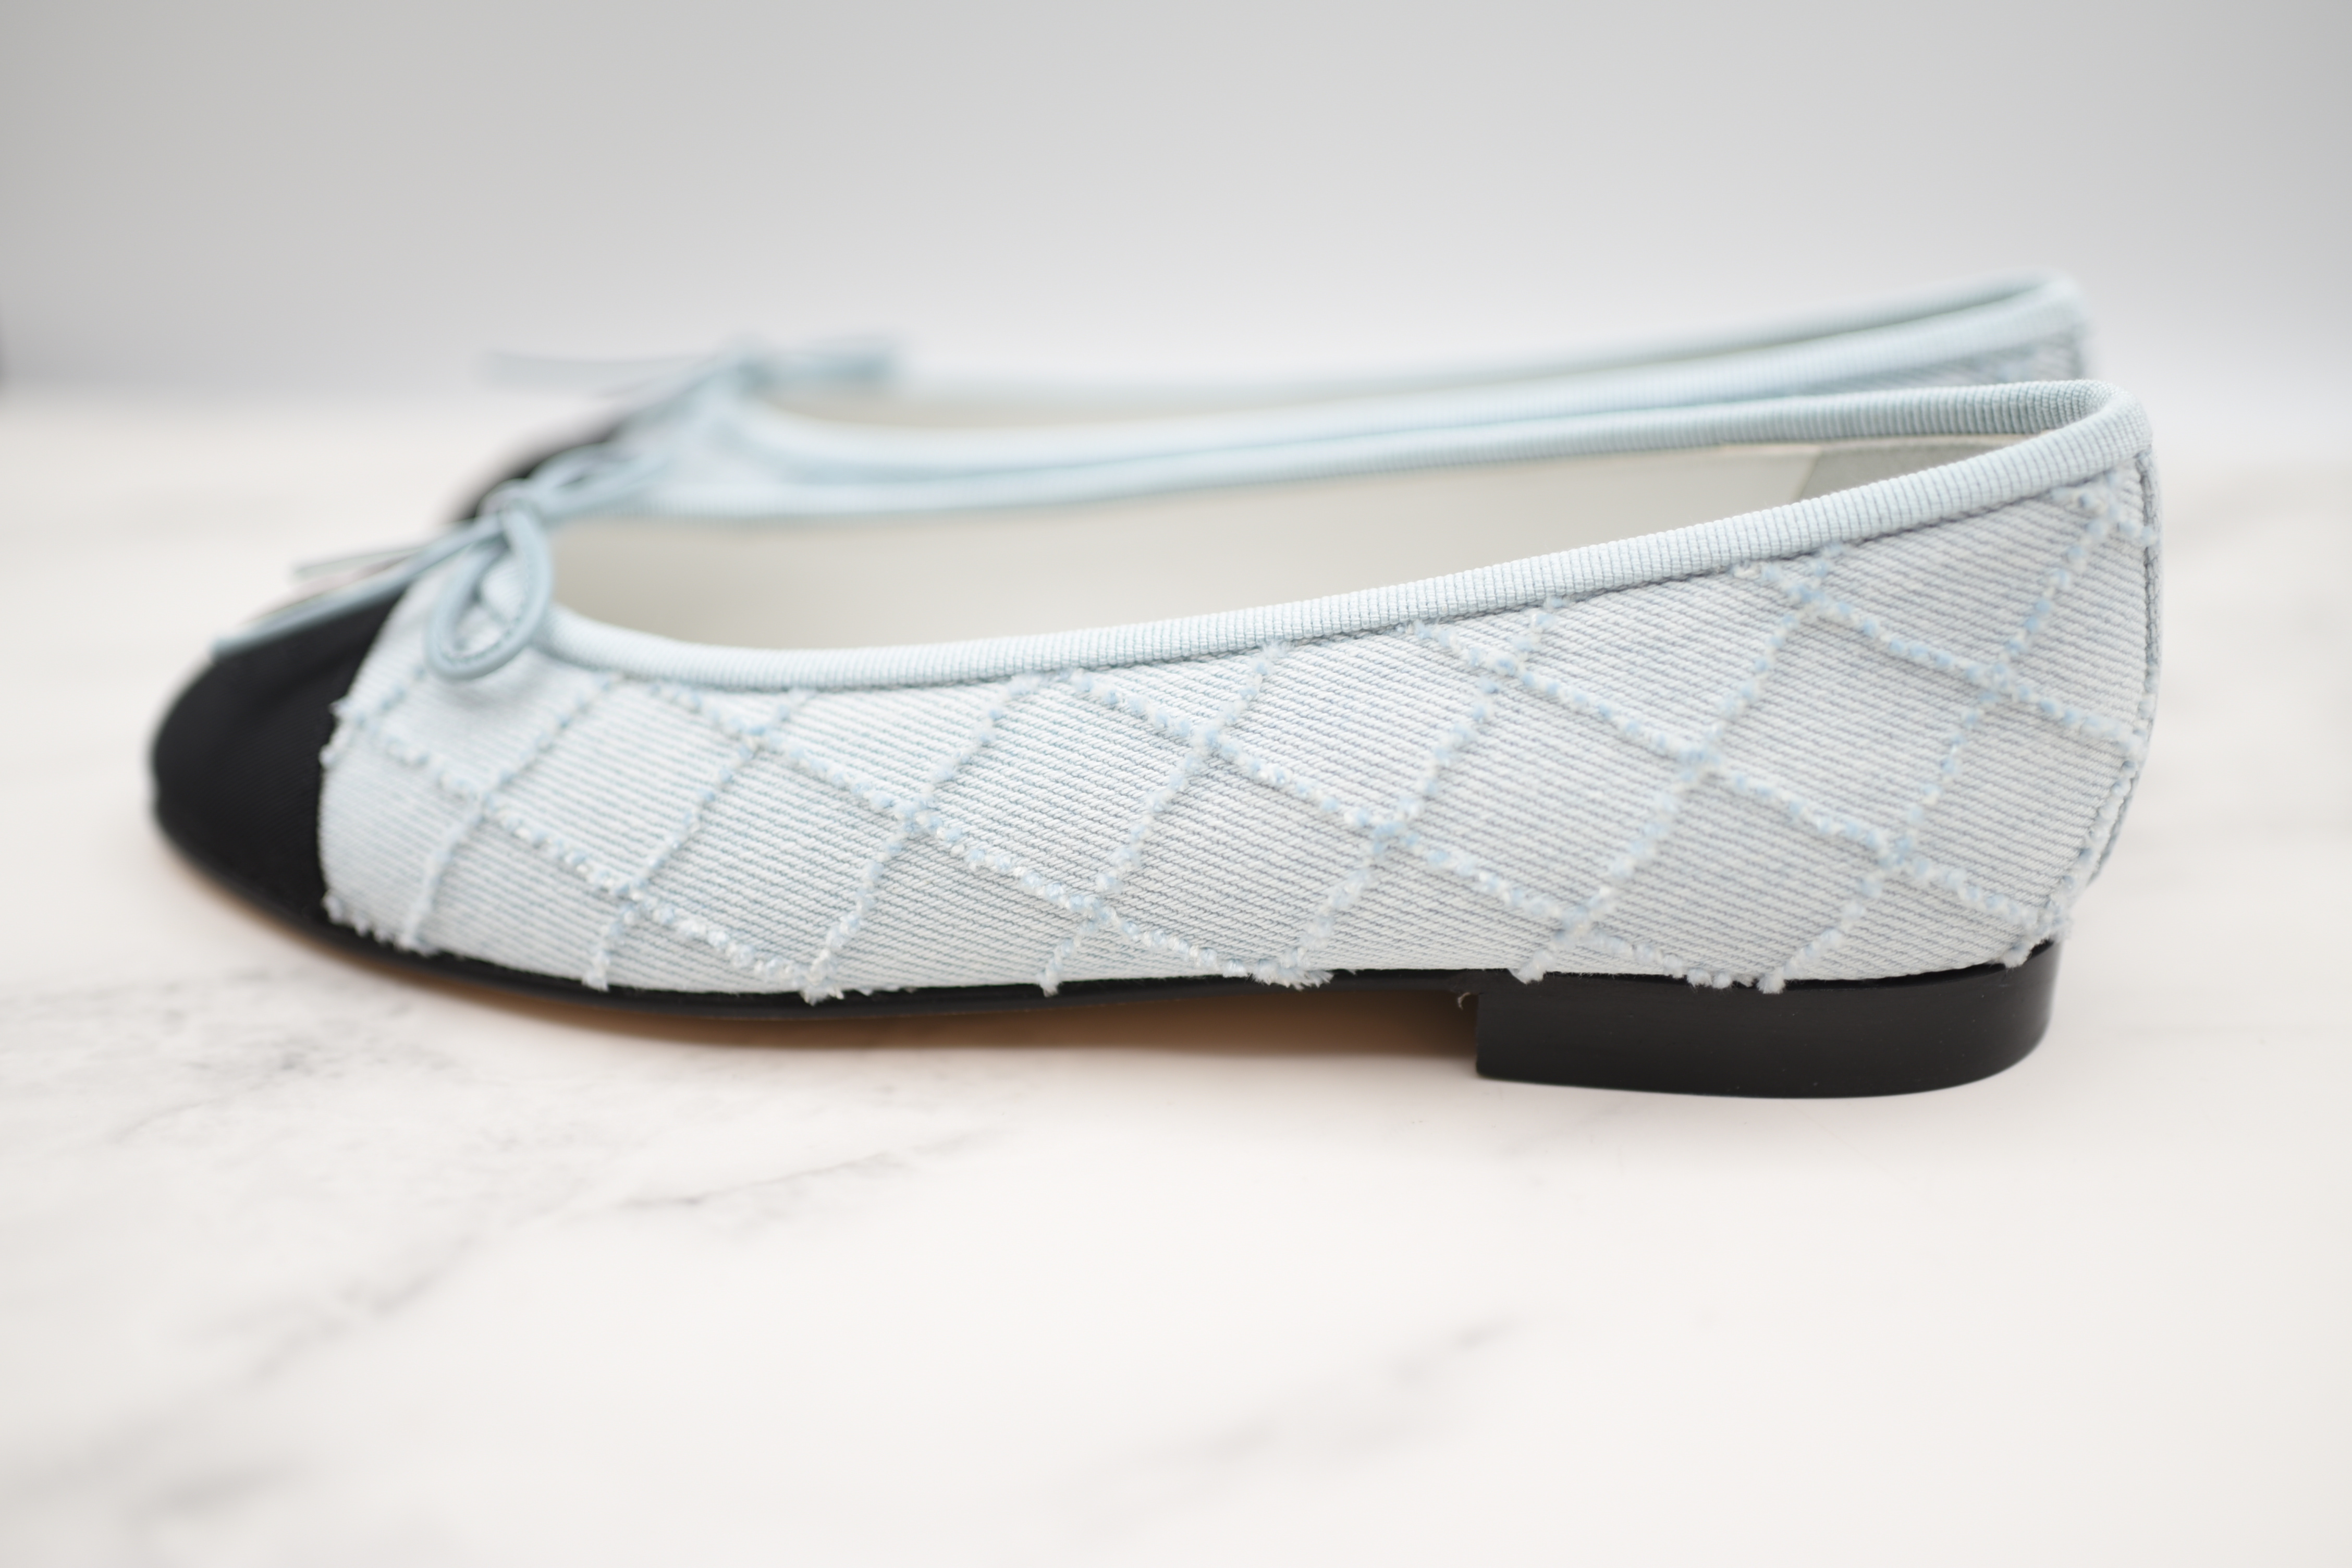 Chanel Ballet Flats, Blue Denim with Black, Size 38.5, New in Box GA001